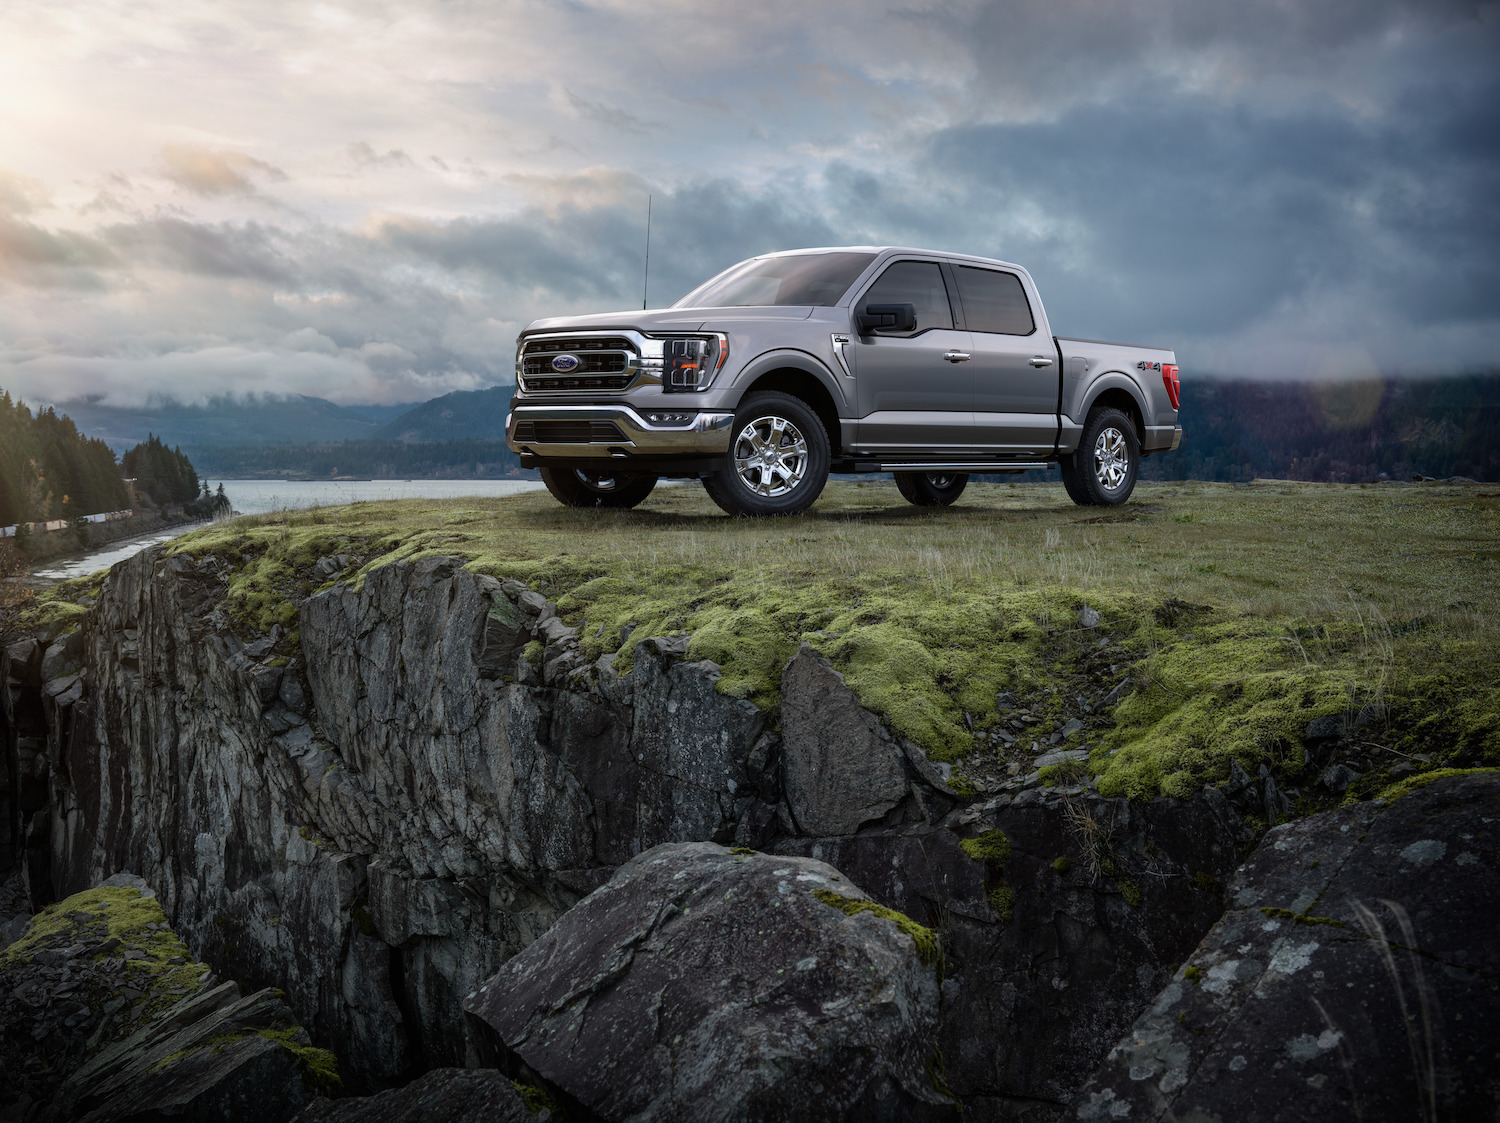 This is the 2021 2022 F-150 Platinum exterior with chrome badges | Ford Motor Company